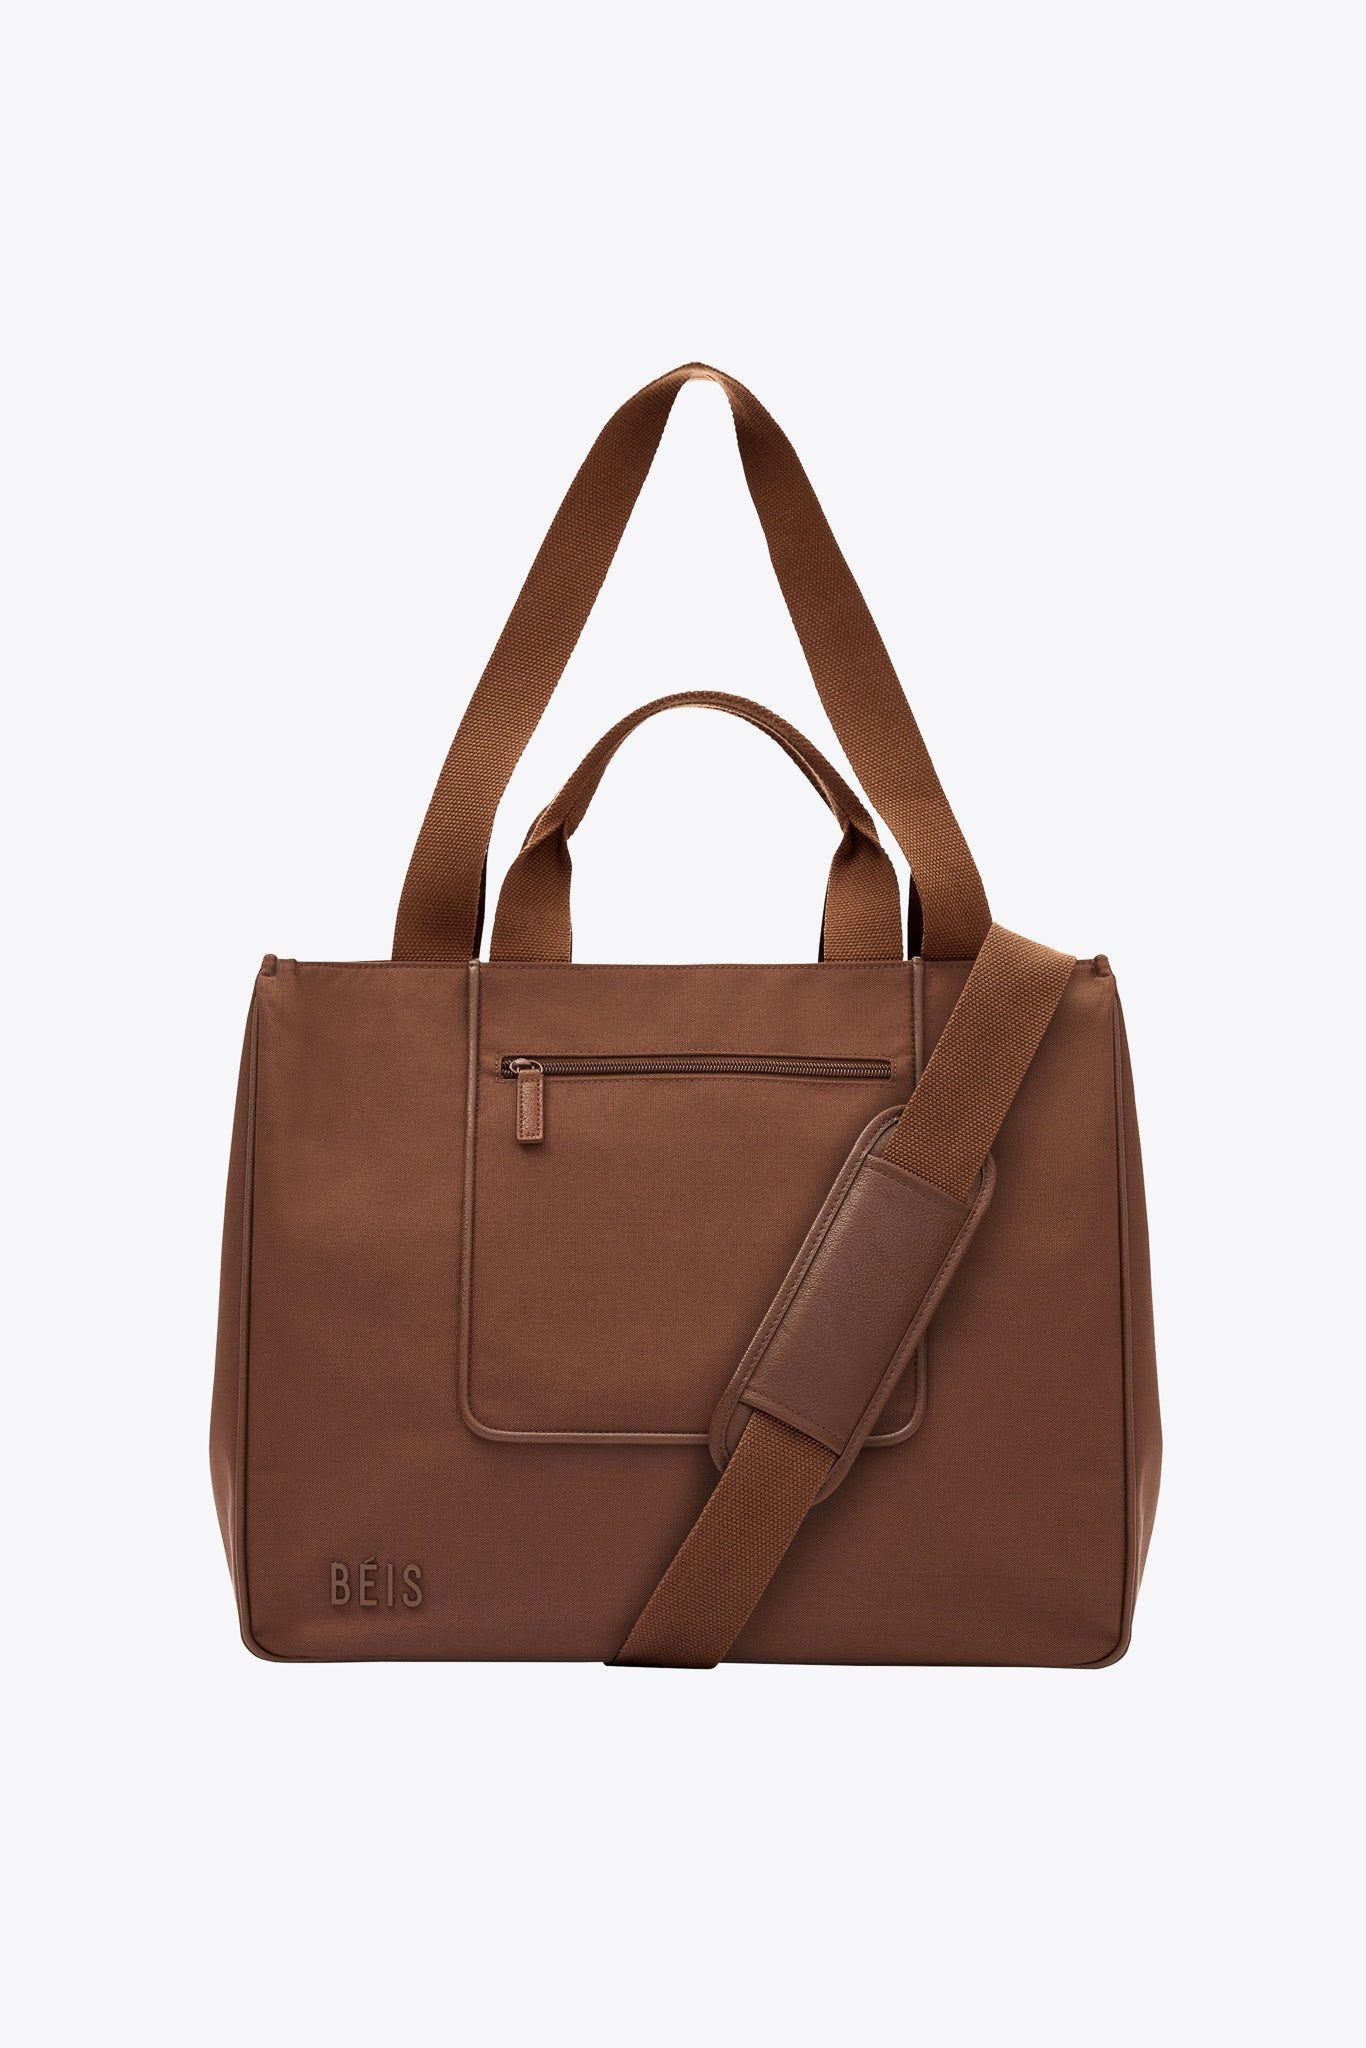 The East To West Tote in Maple | BÉIS Travel